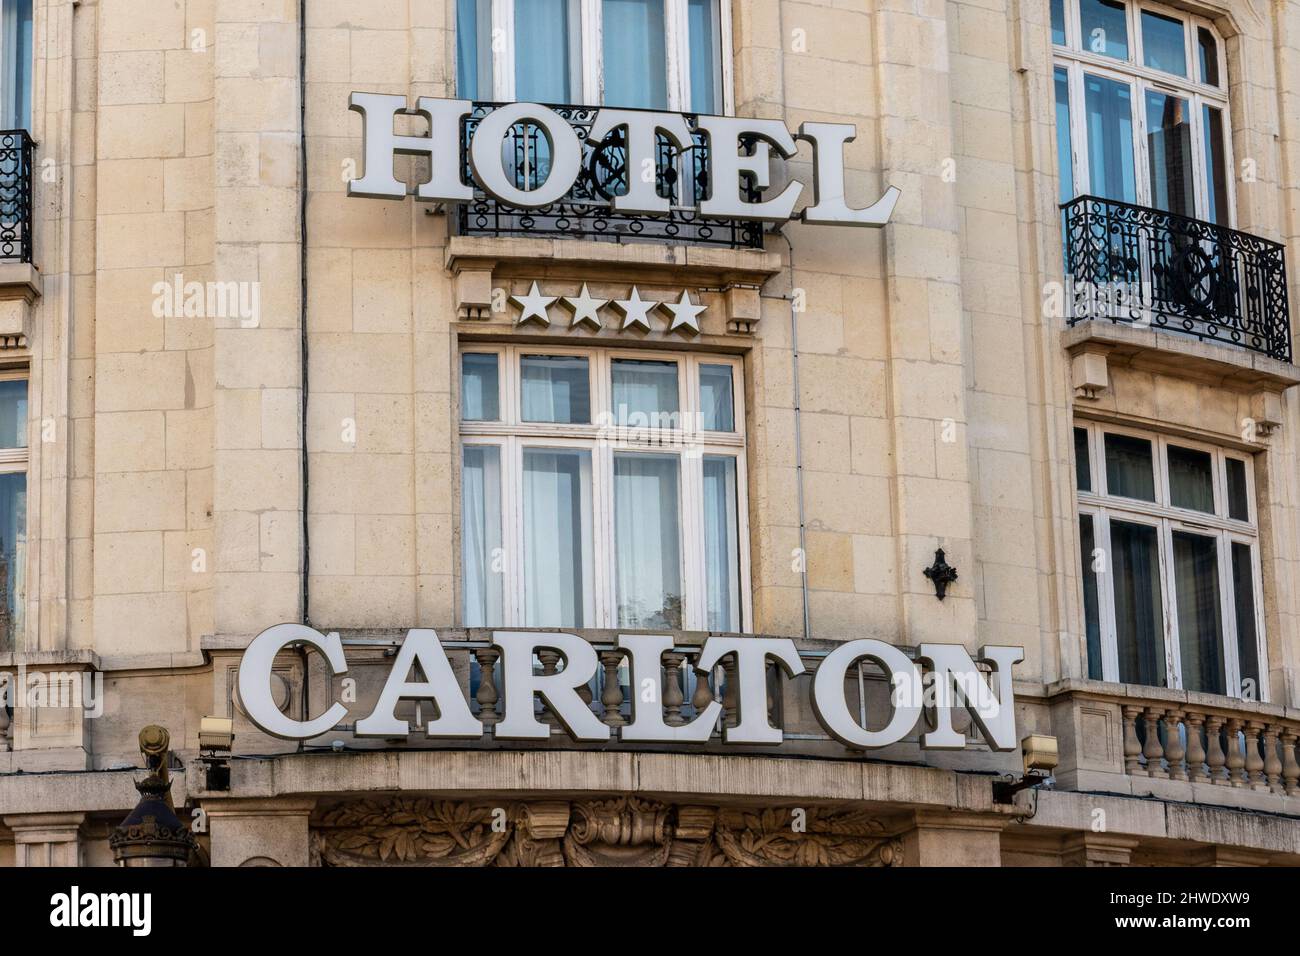 Lille, France, February 28, 2022. The Carlton hotel in Lille is a four-star hotel located on the Place de l'Opera, Stock Photo